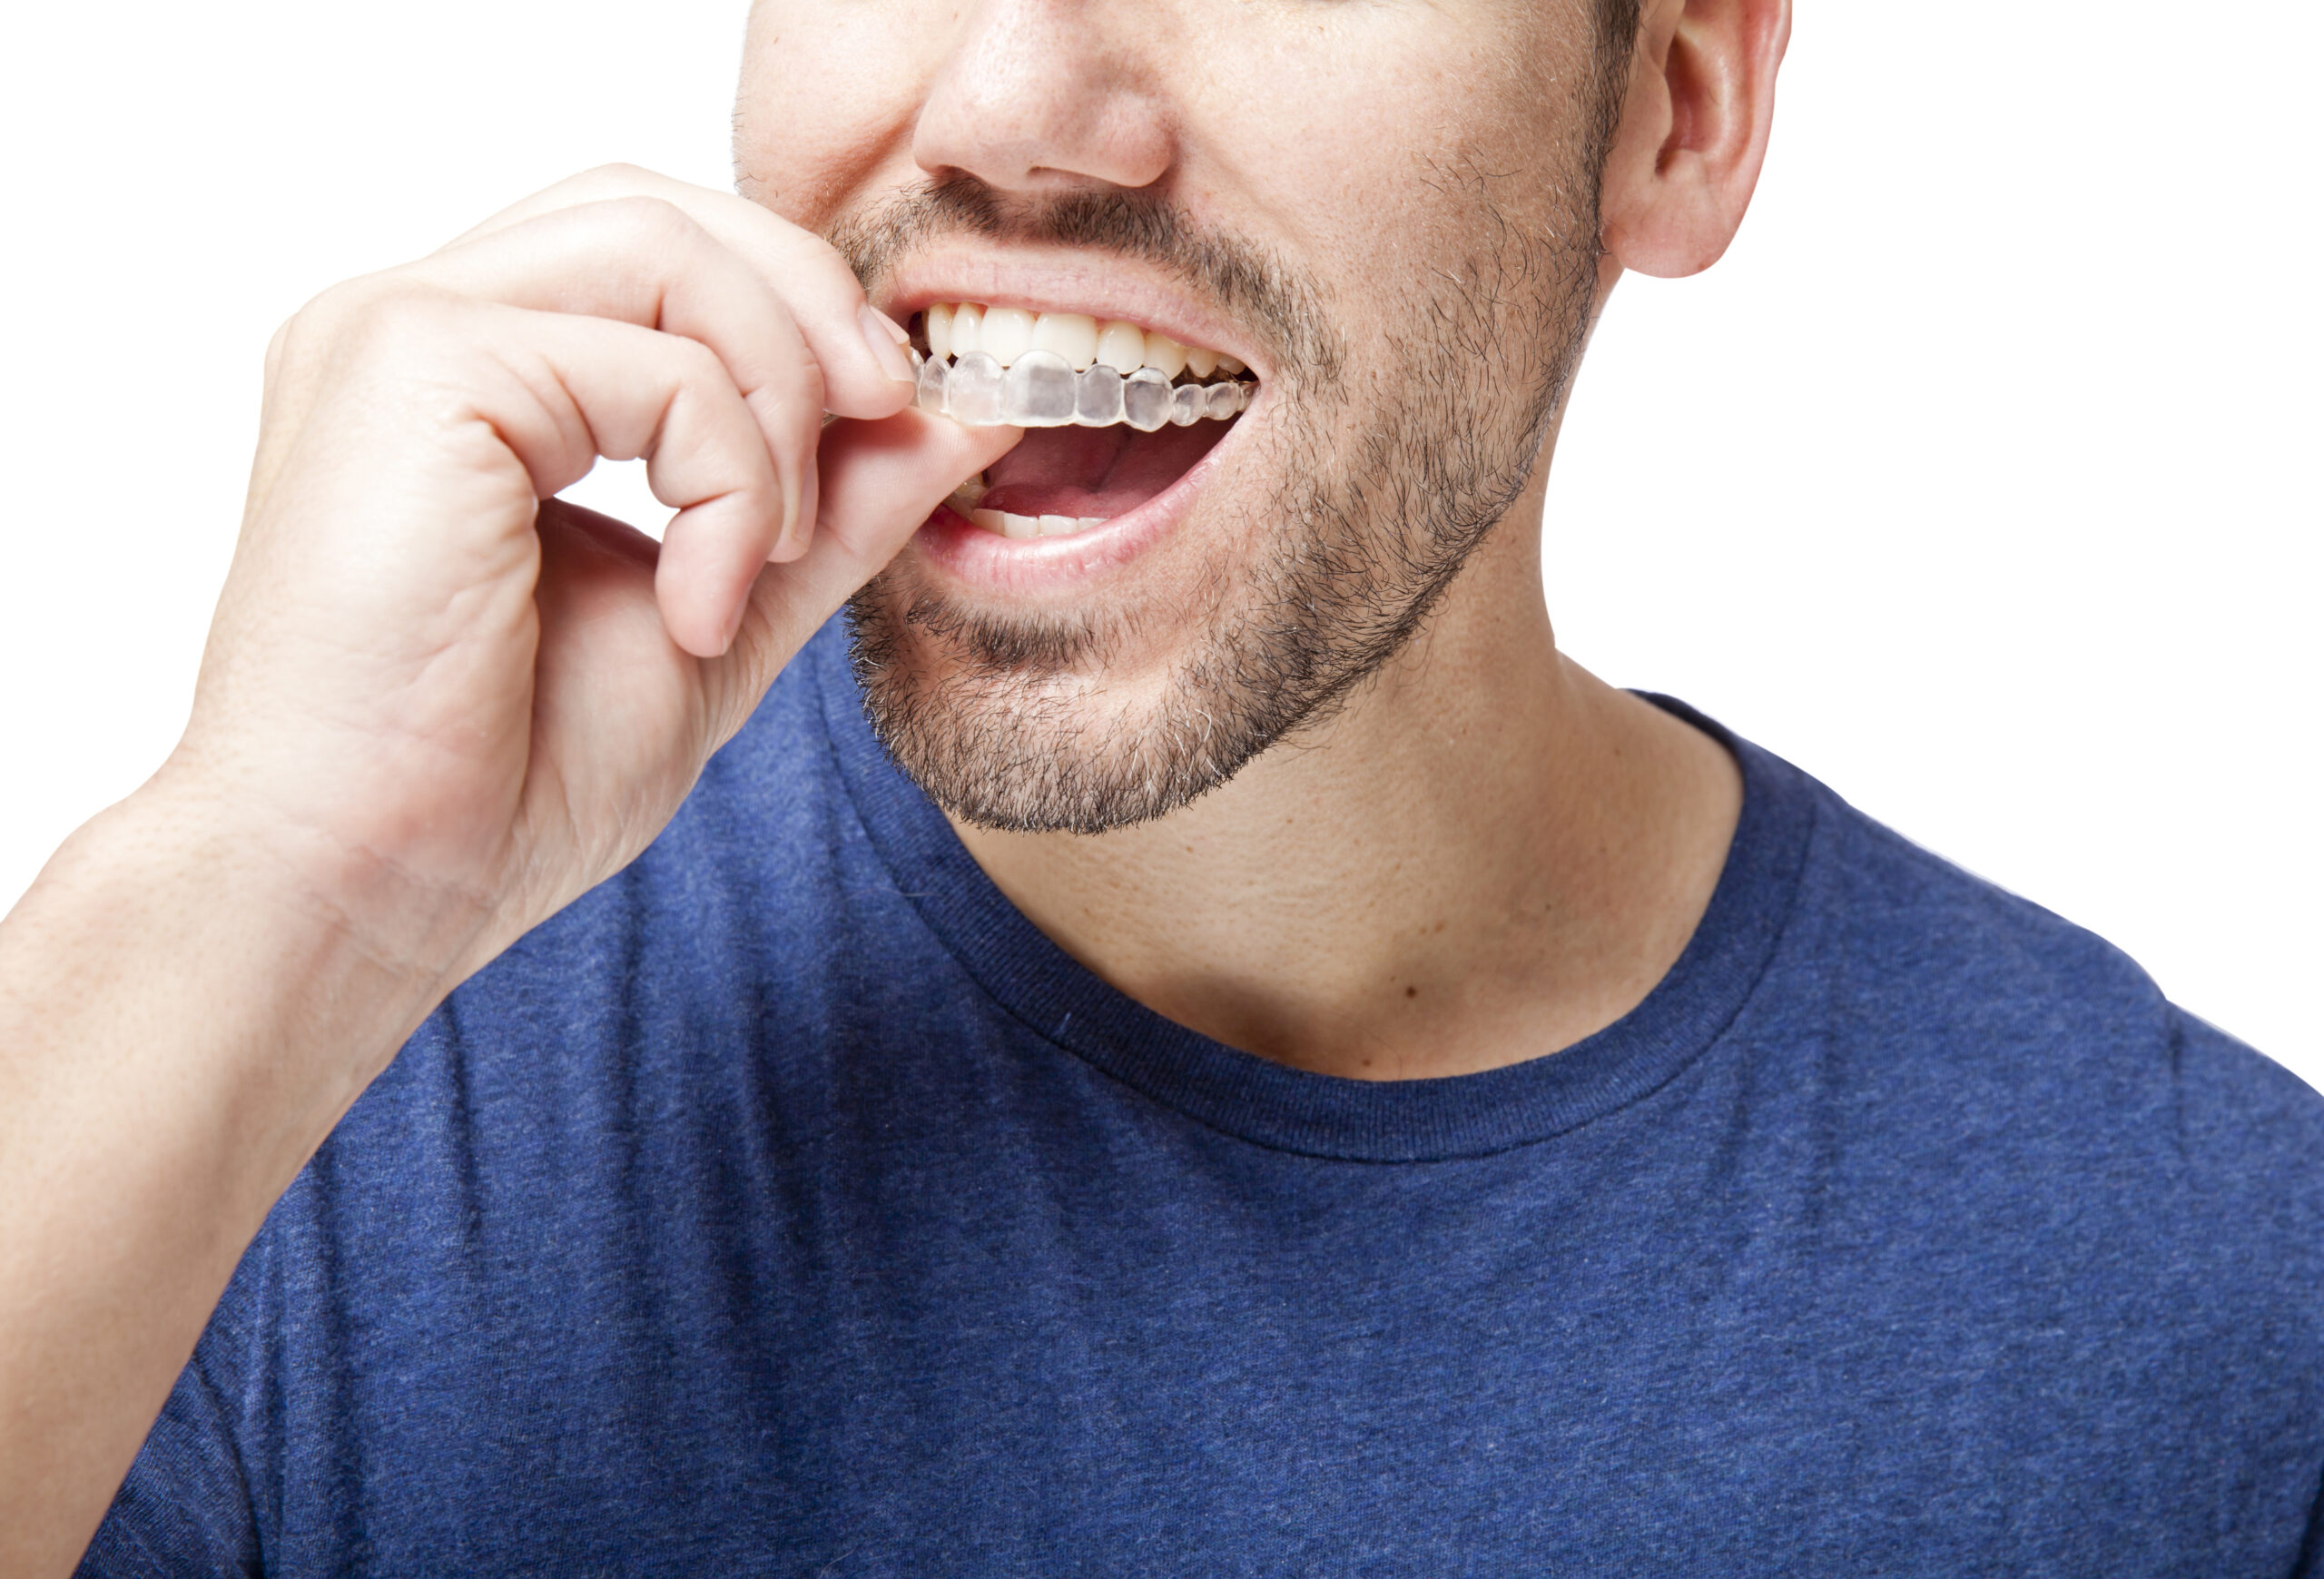 https://www.innisfilorthodontics.com/wp-content/uploads/2021/11/four-things-you-shouldnt-do-to-achieve-a-successful-invisalign-treatment-scaled.jpg